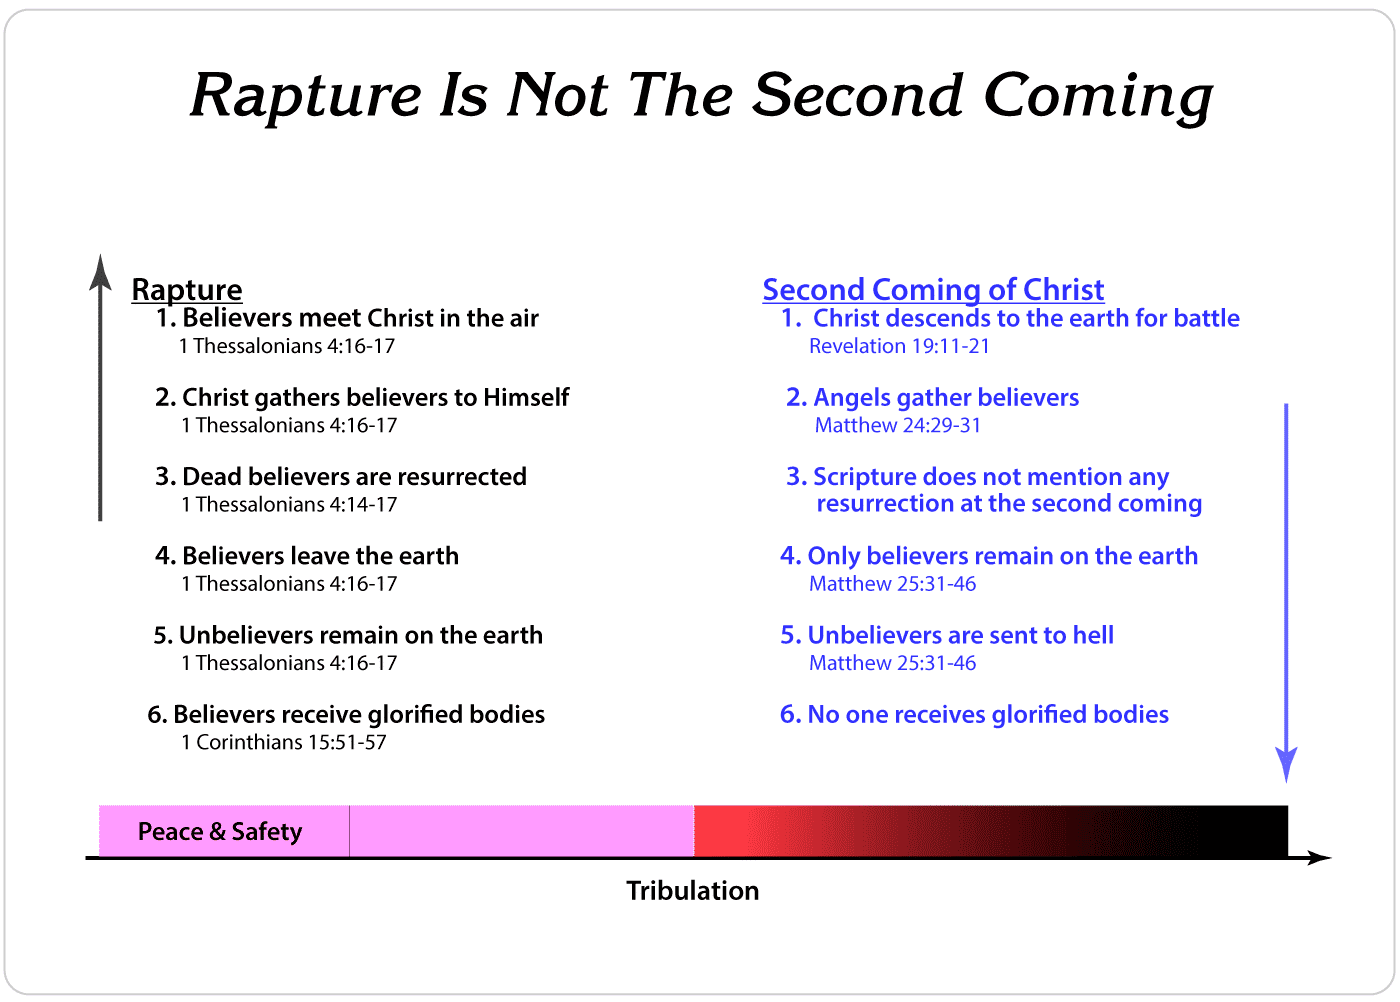 Rapture is not the Second Coming of Christ